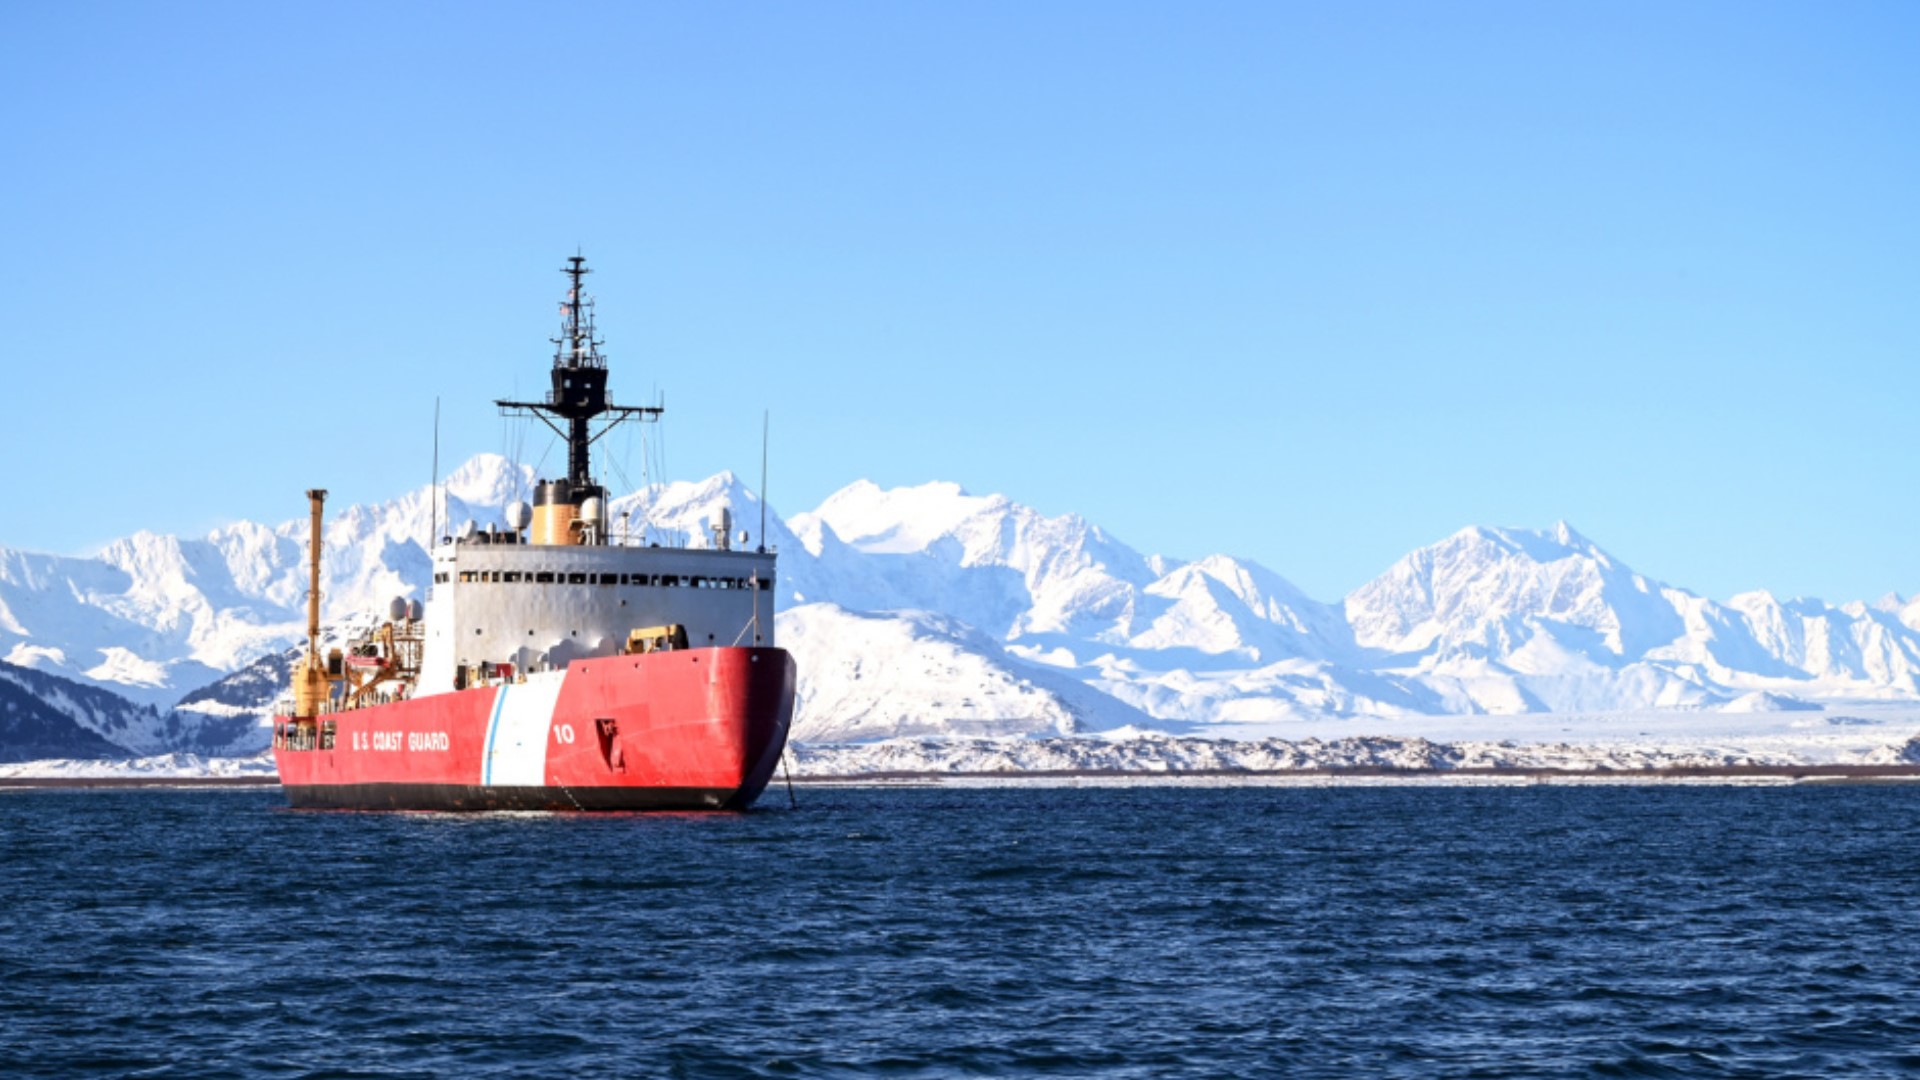 The Polar Star went further north than any other U.S. military surface vessel has in the winter.